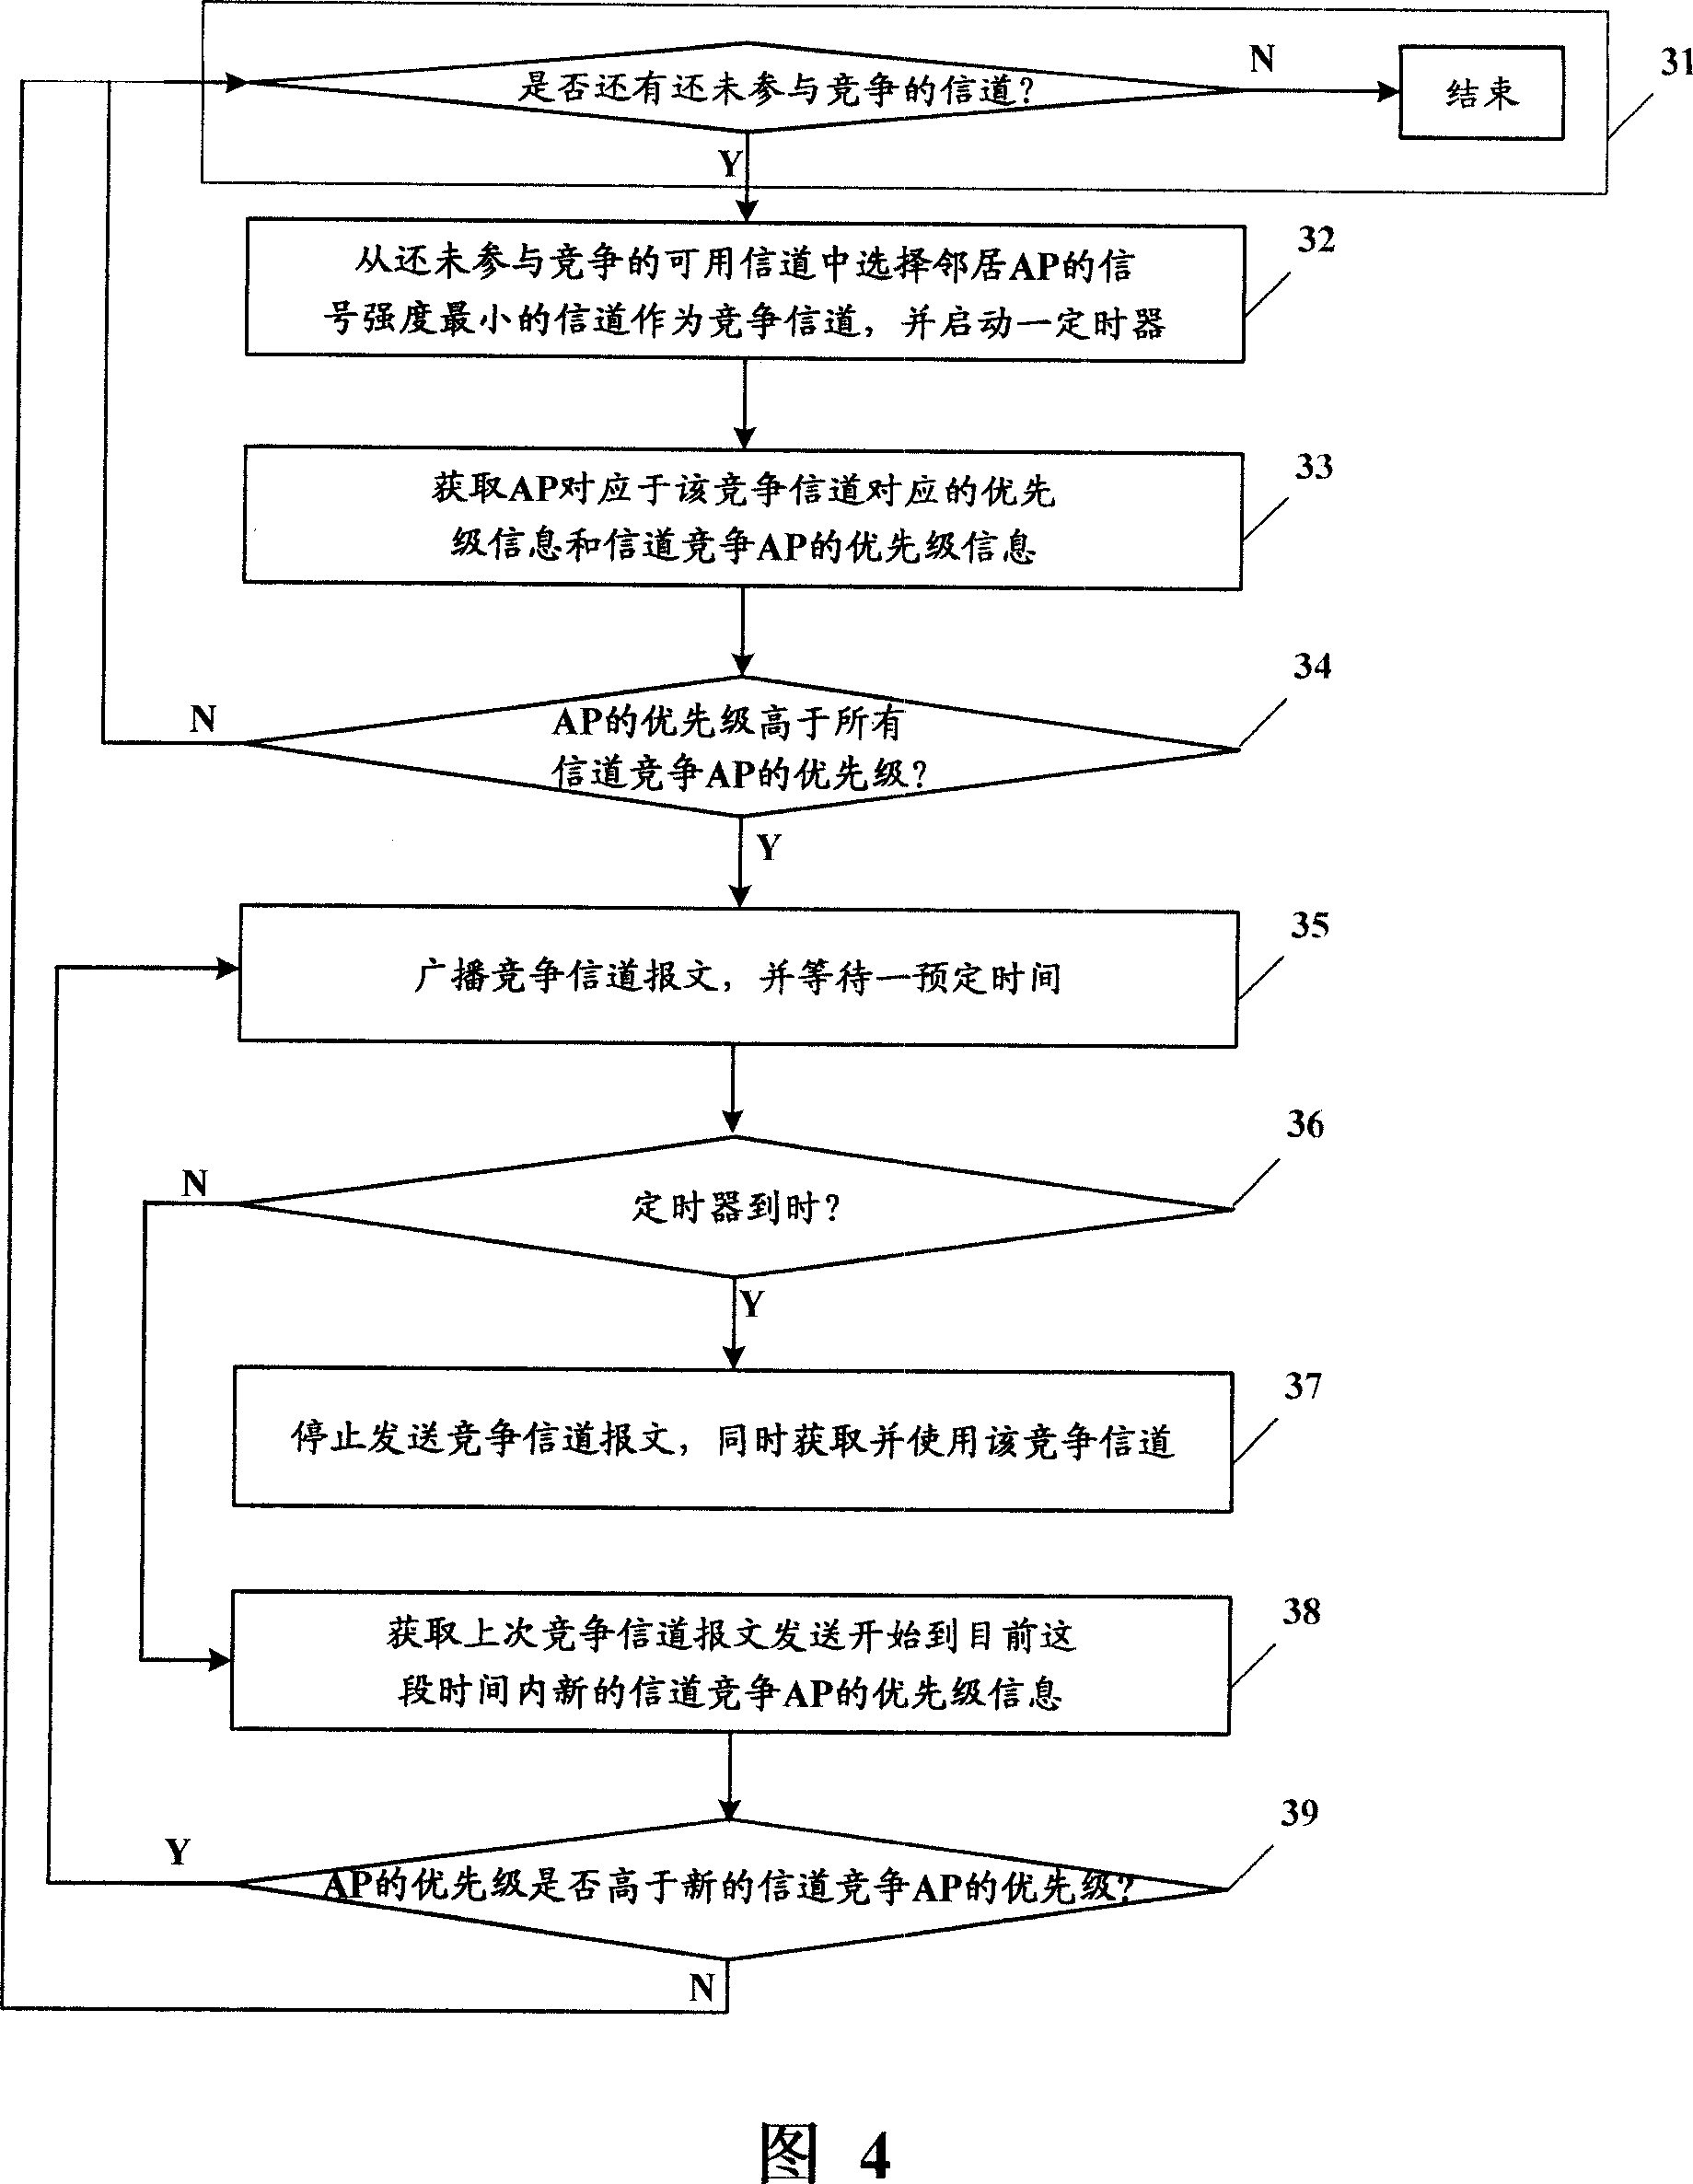 Device, method, AP, central controller, software and device for AP channel selection